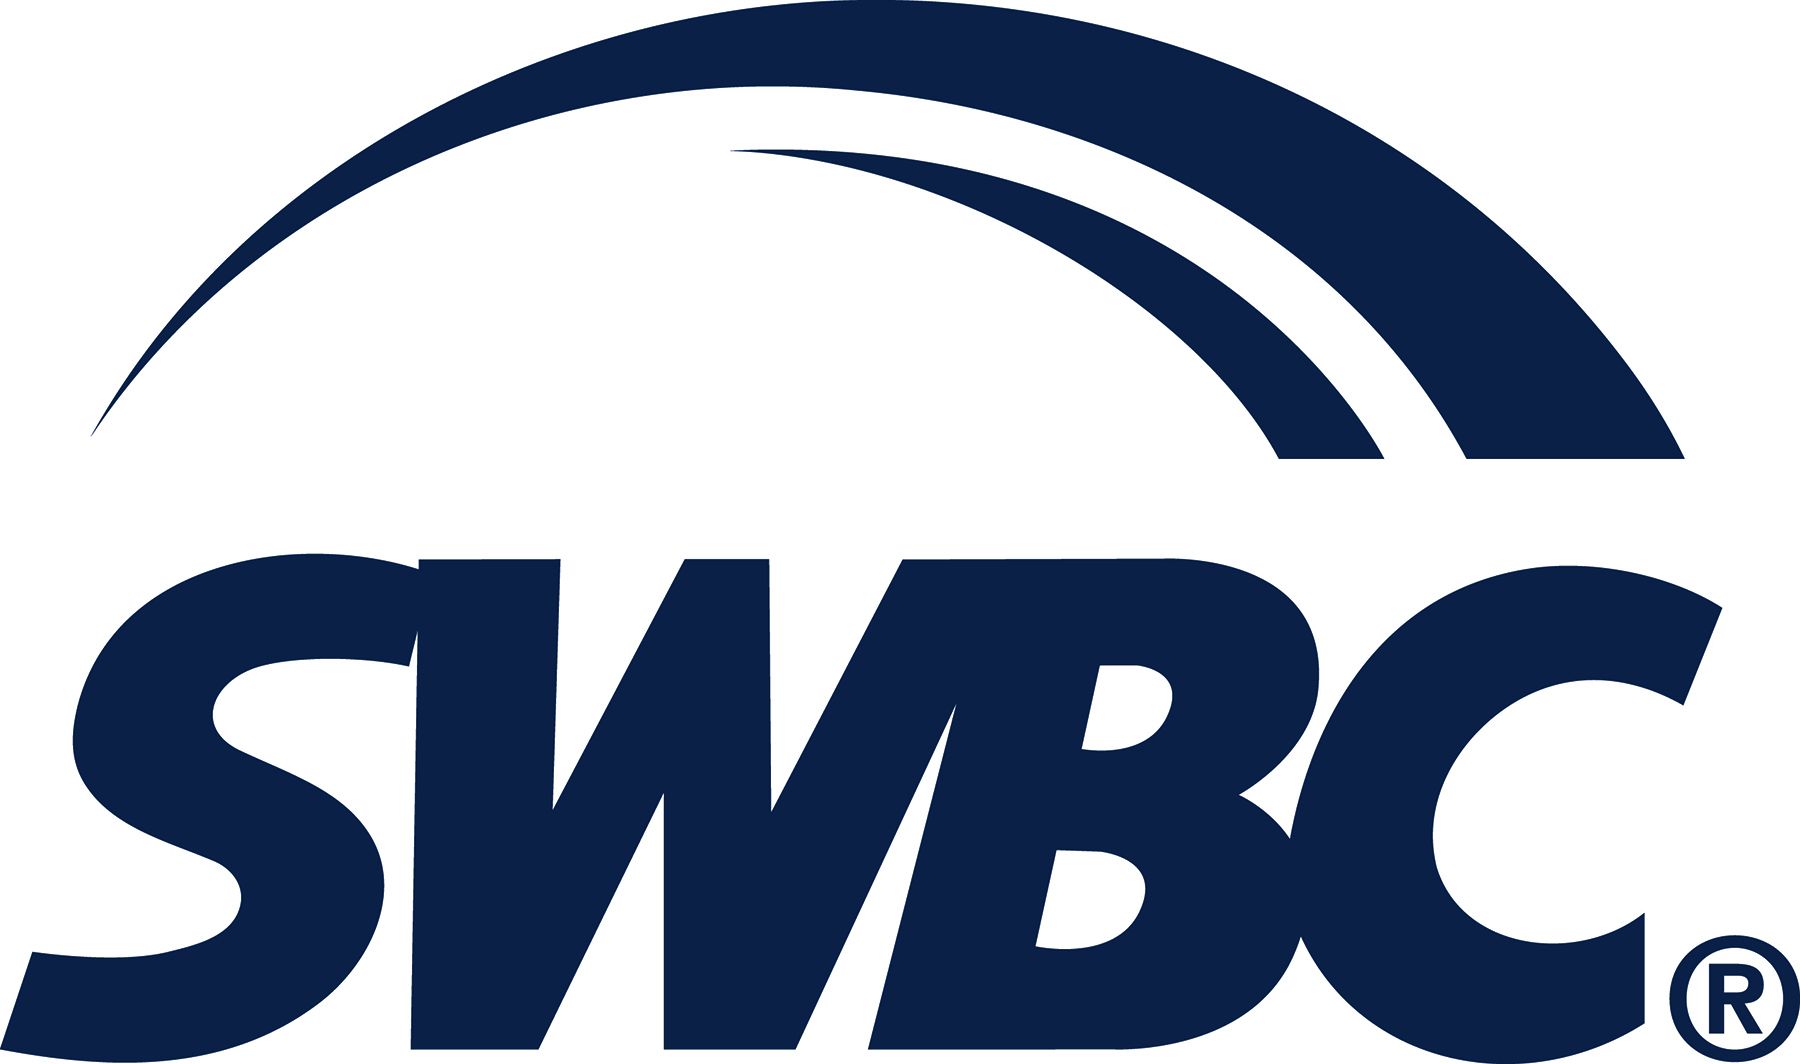 SWBC_Corporate_Blue_CMYK-for normal collateral print.jpg